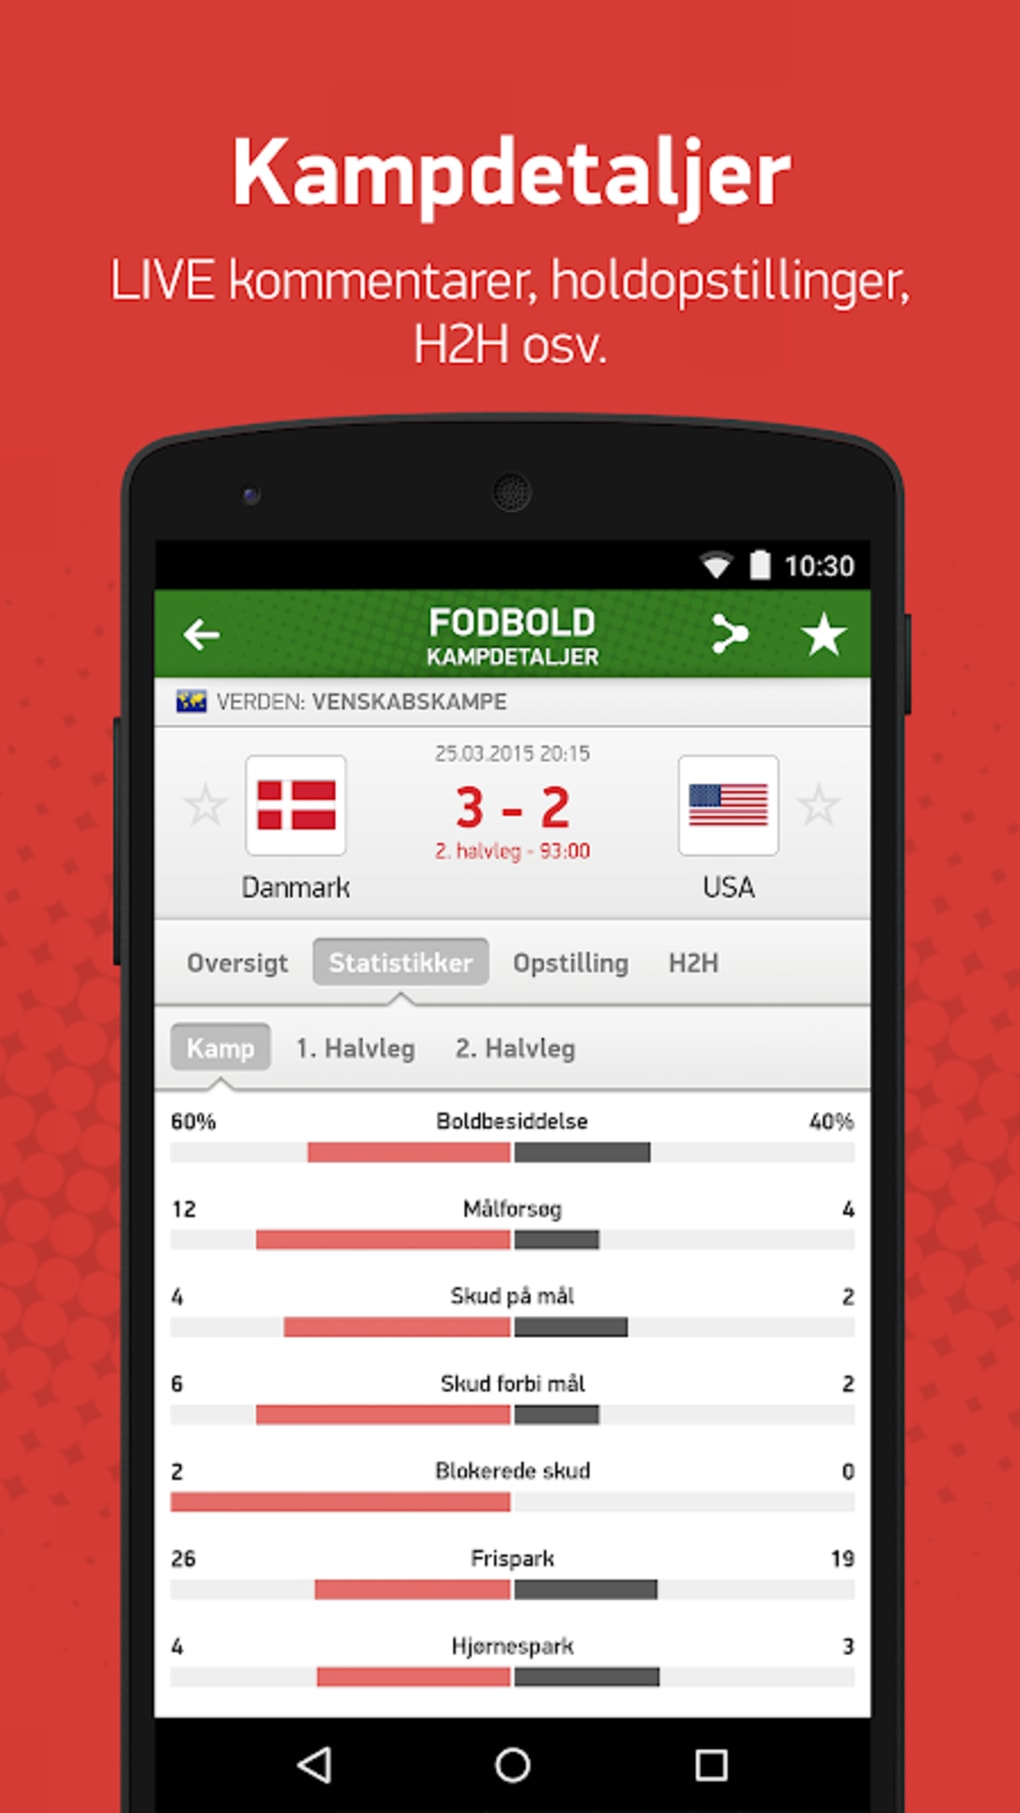 Flashscore live scores – Apps on Google Play